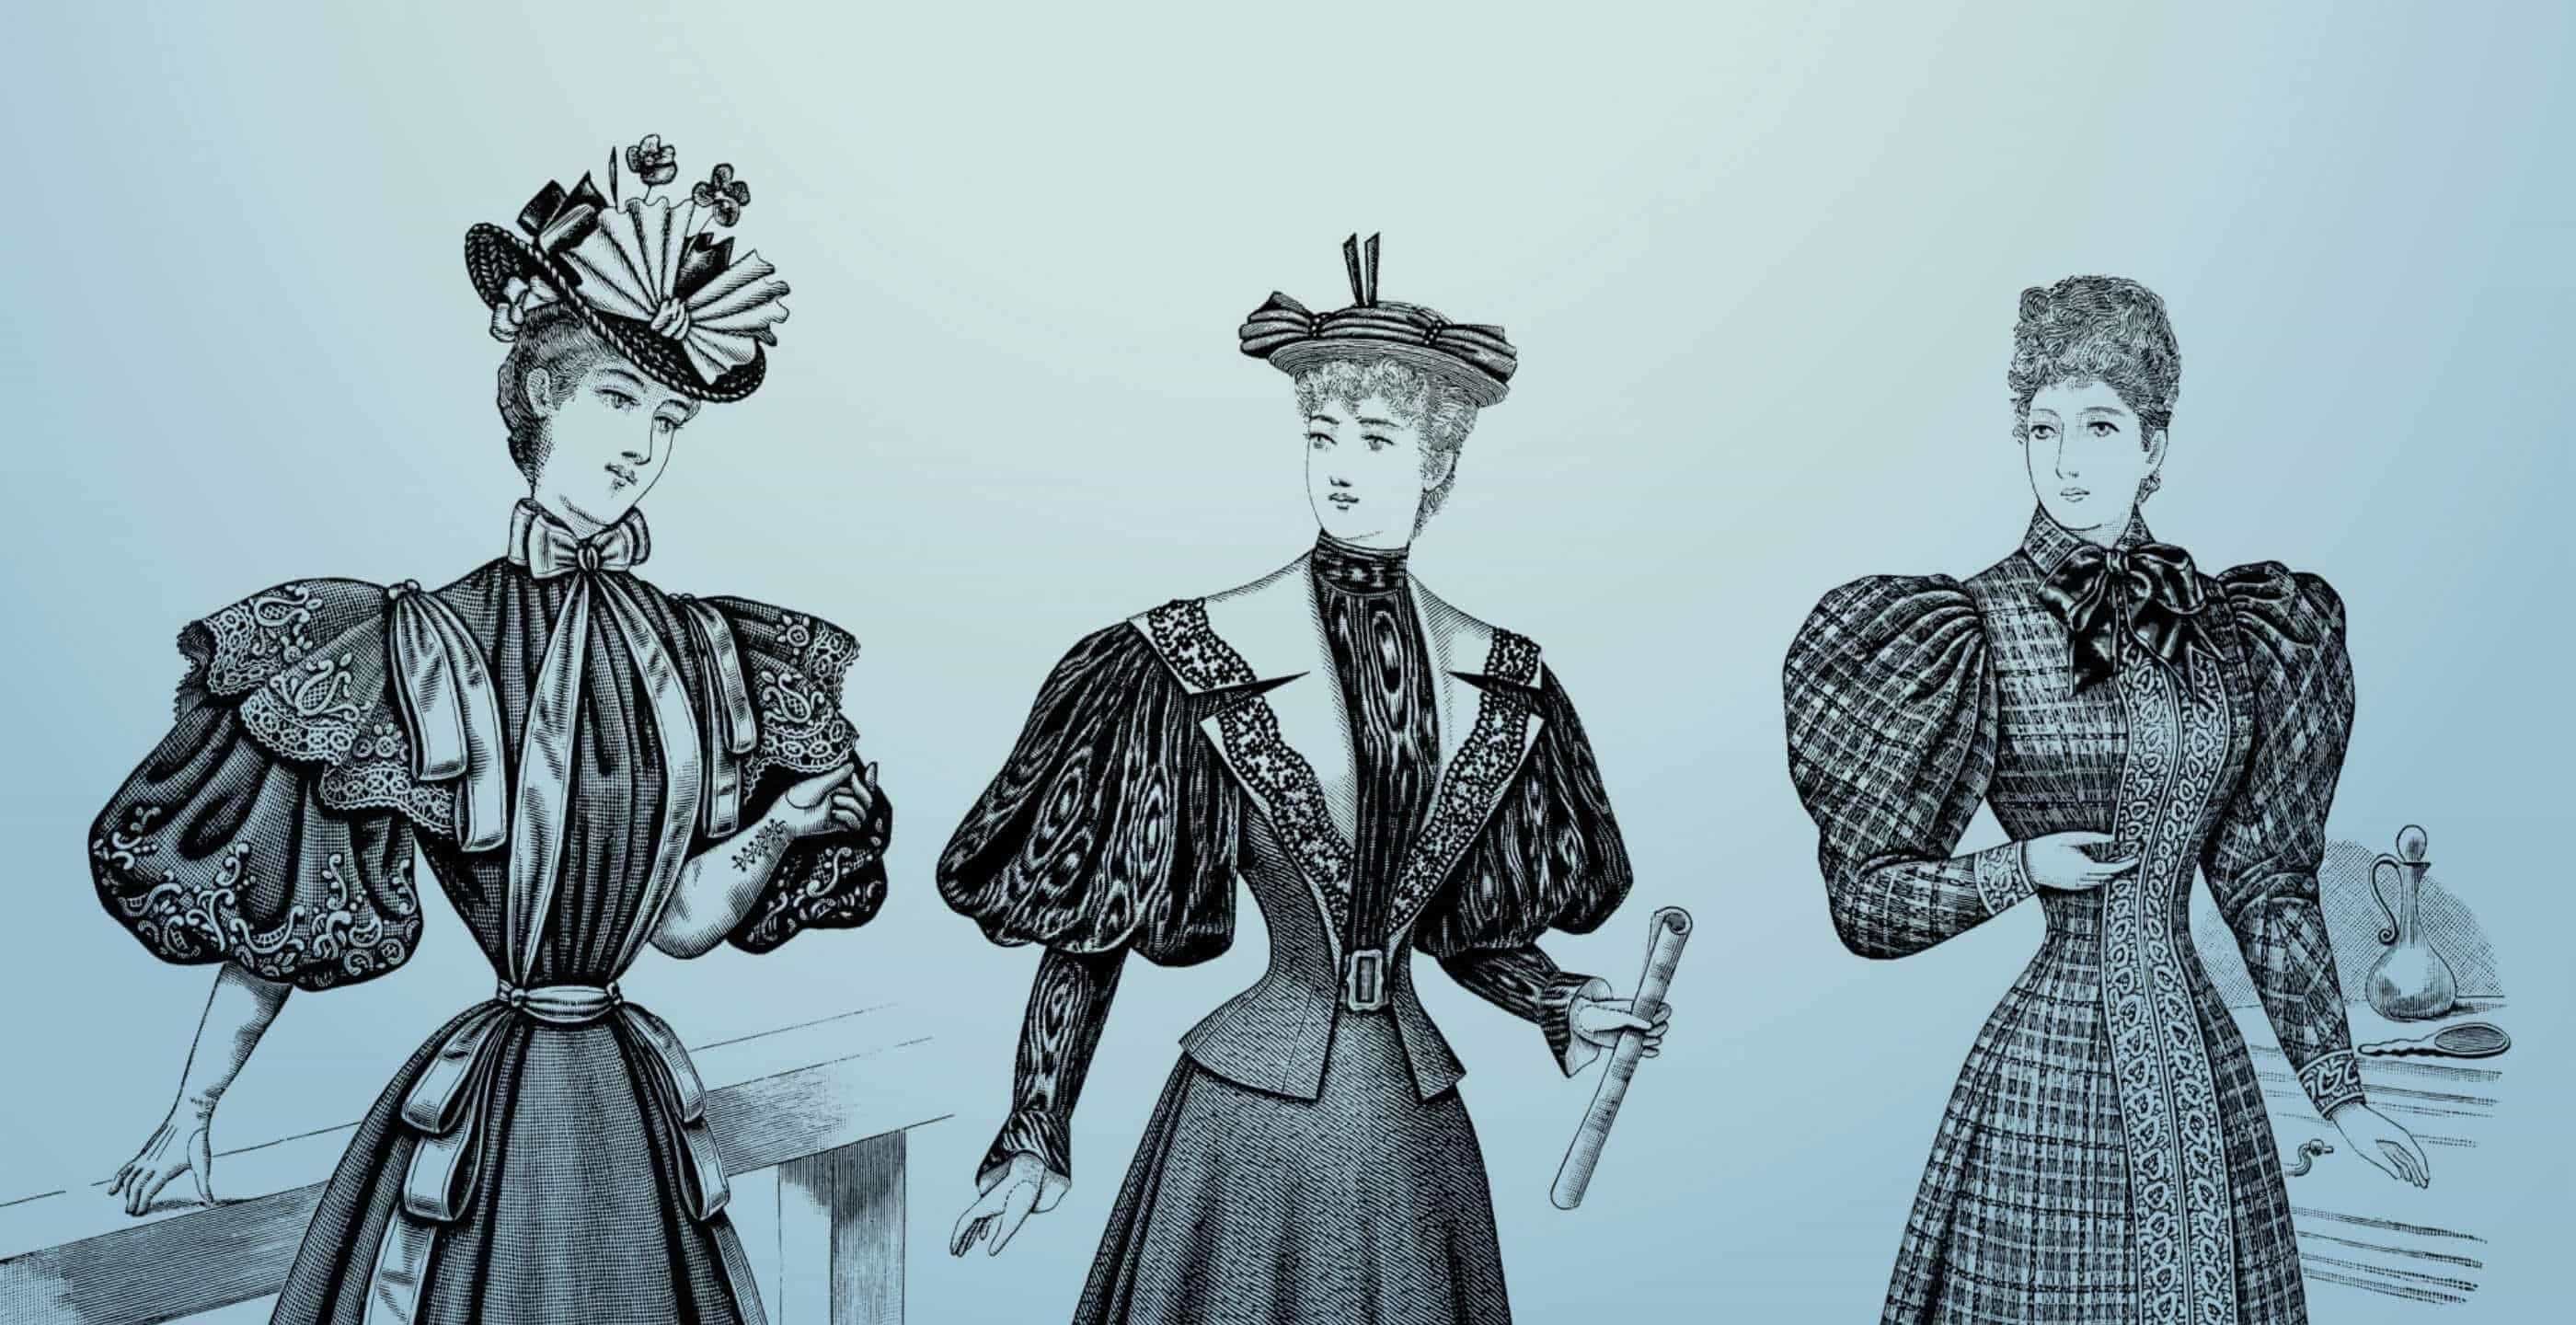 Women, Fashion, & Society: A Timeline of Women's Fashion Suit History